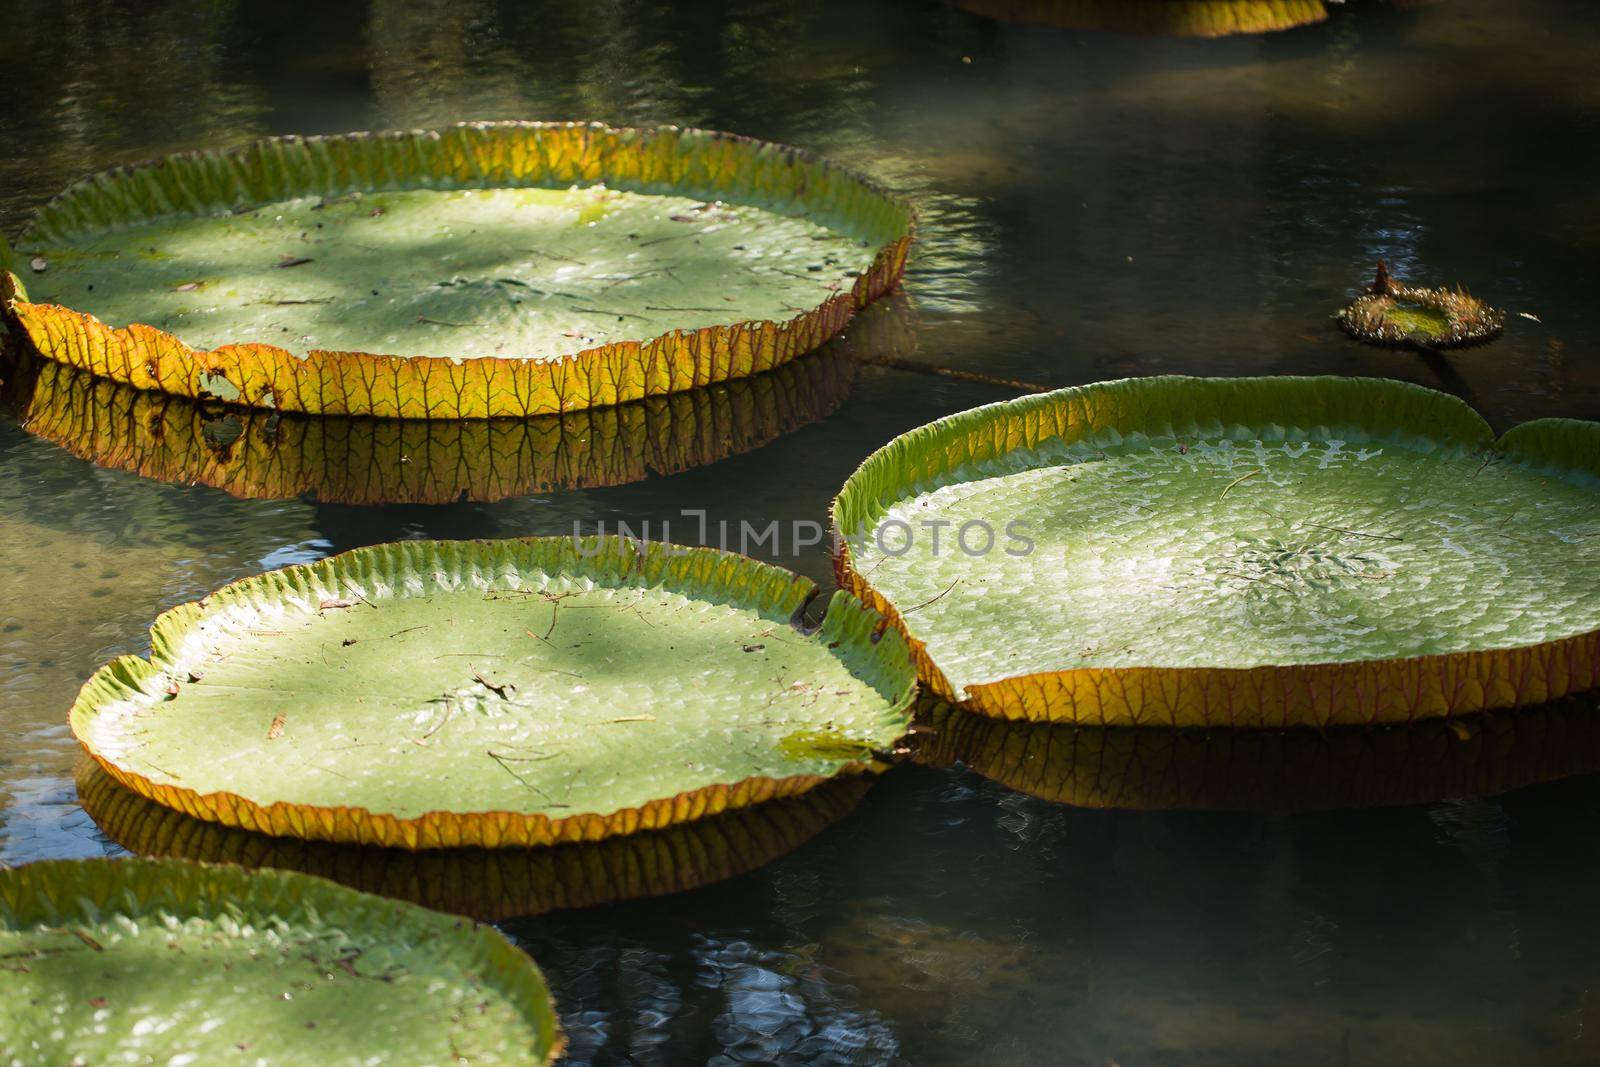 Giant, amazonian lily in water at the Pamplemousess botanical Gardens in Mauritius. Victoria amazonica, Victoria regia